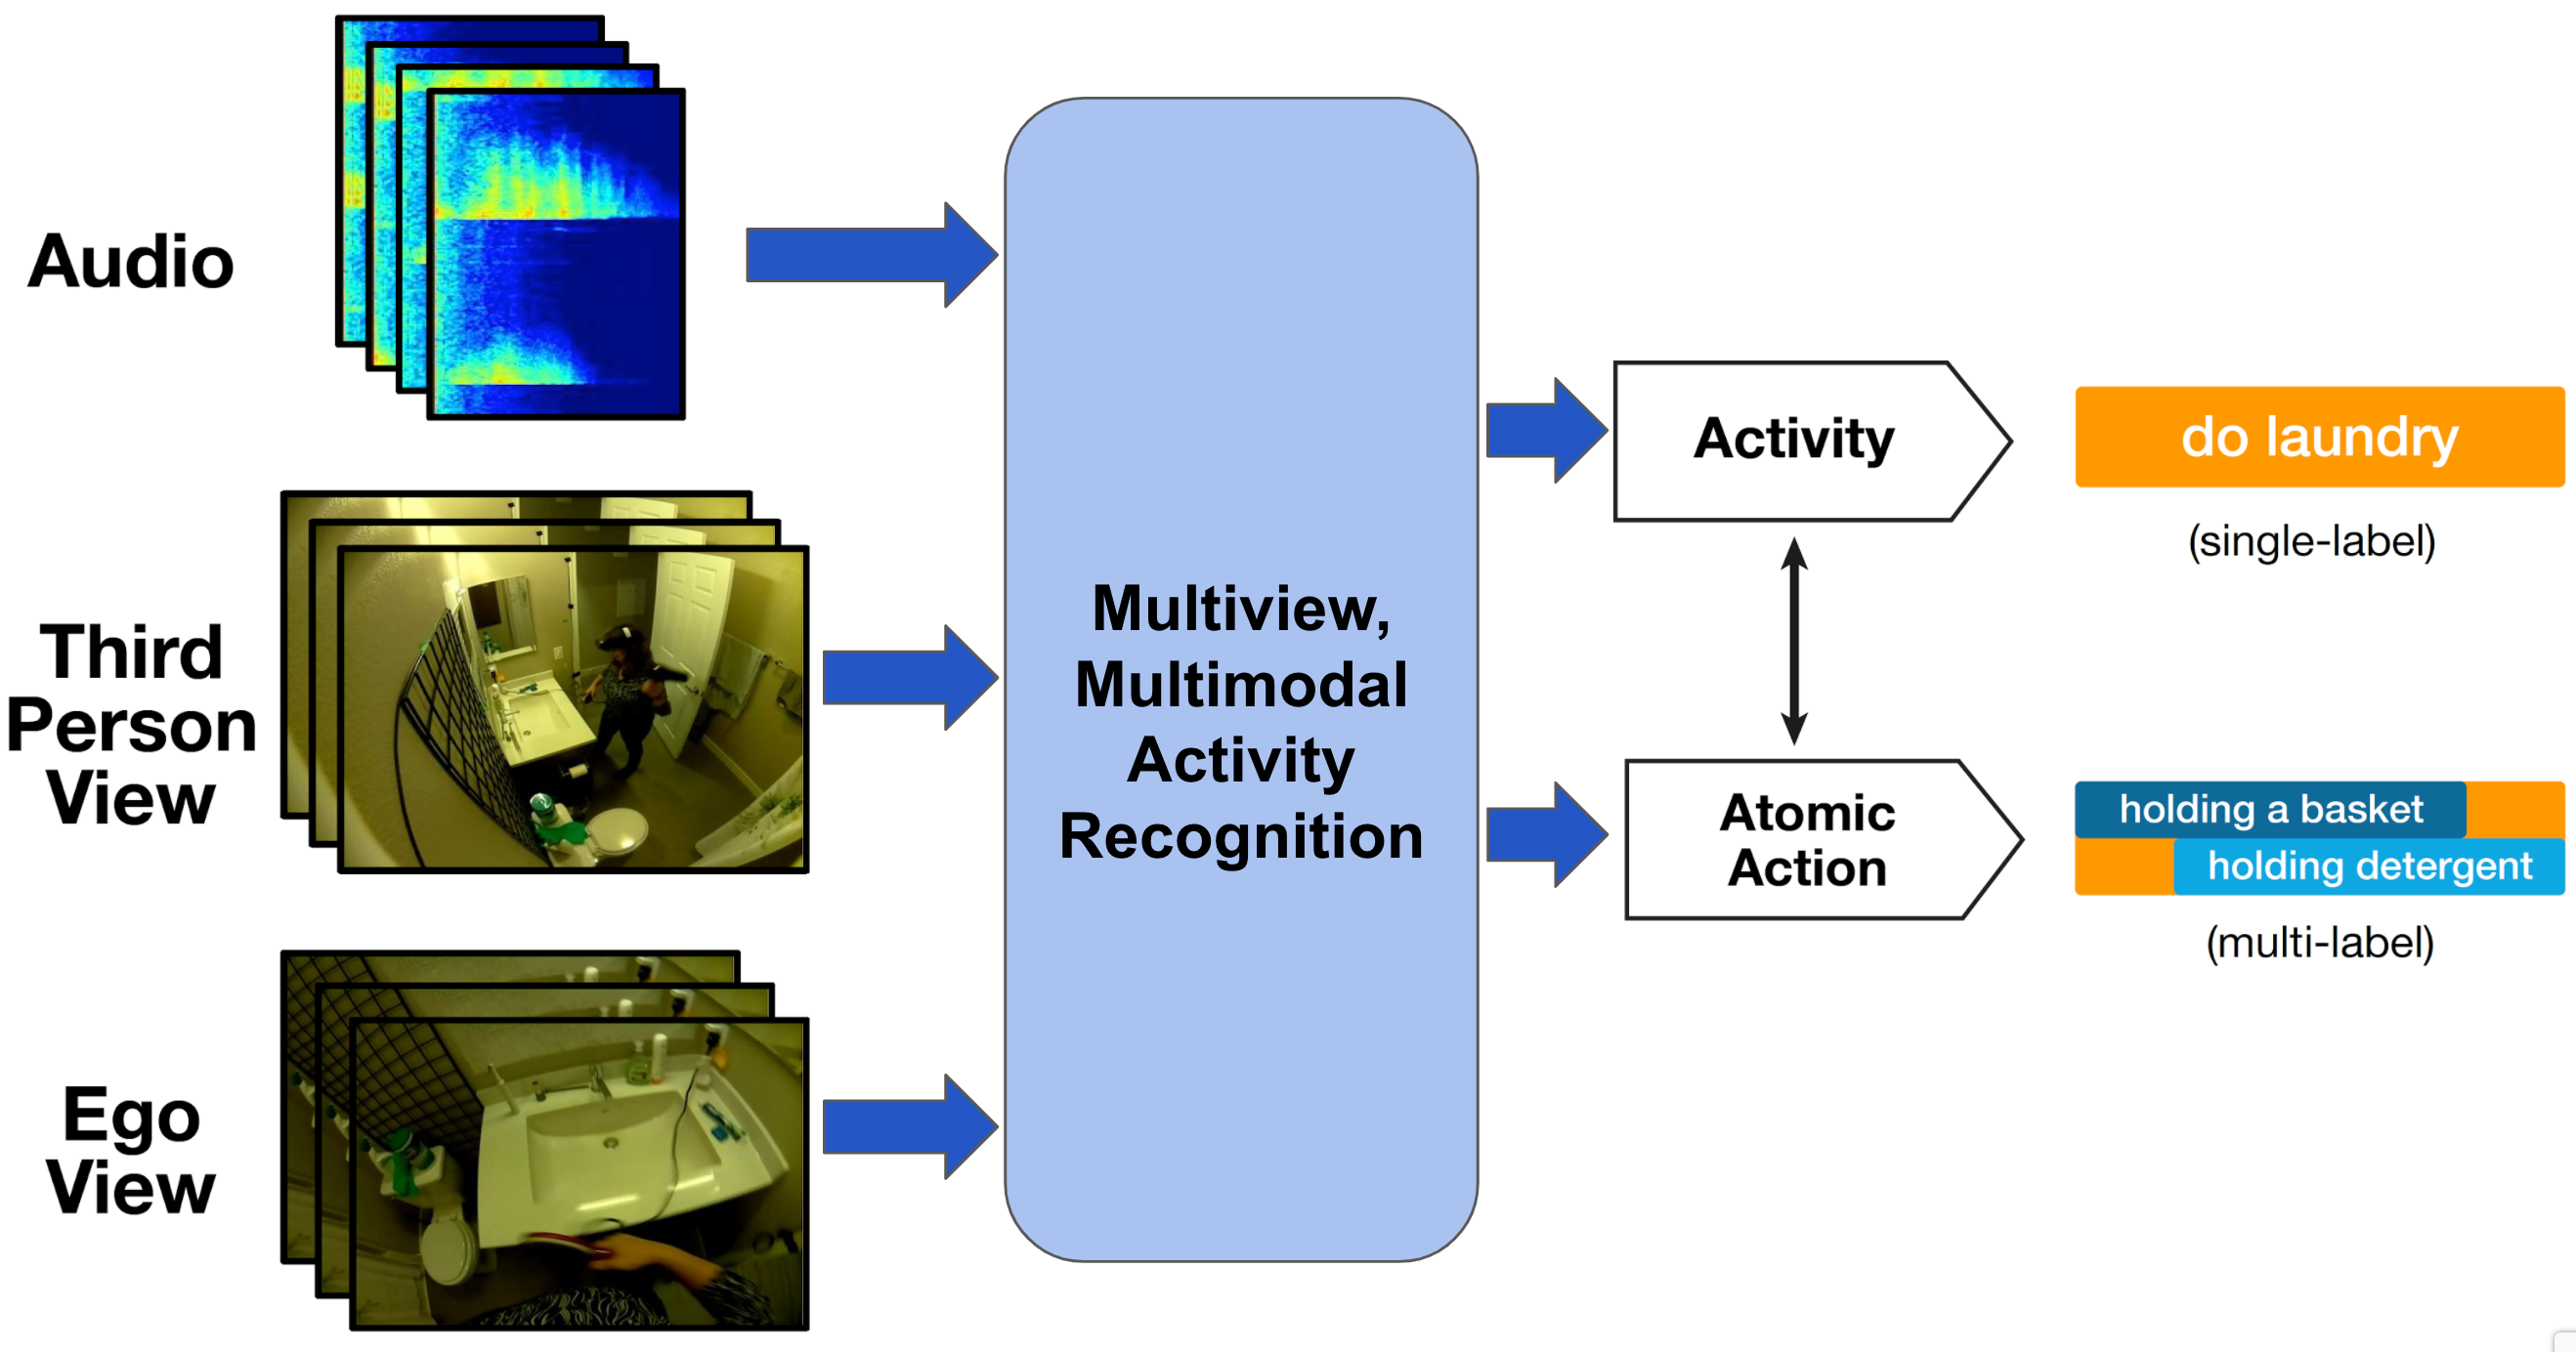 Illustration of multiview, multimodal activity recognition.